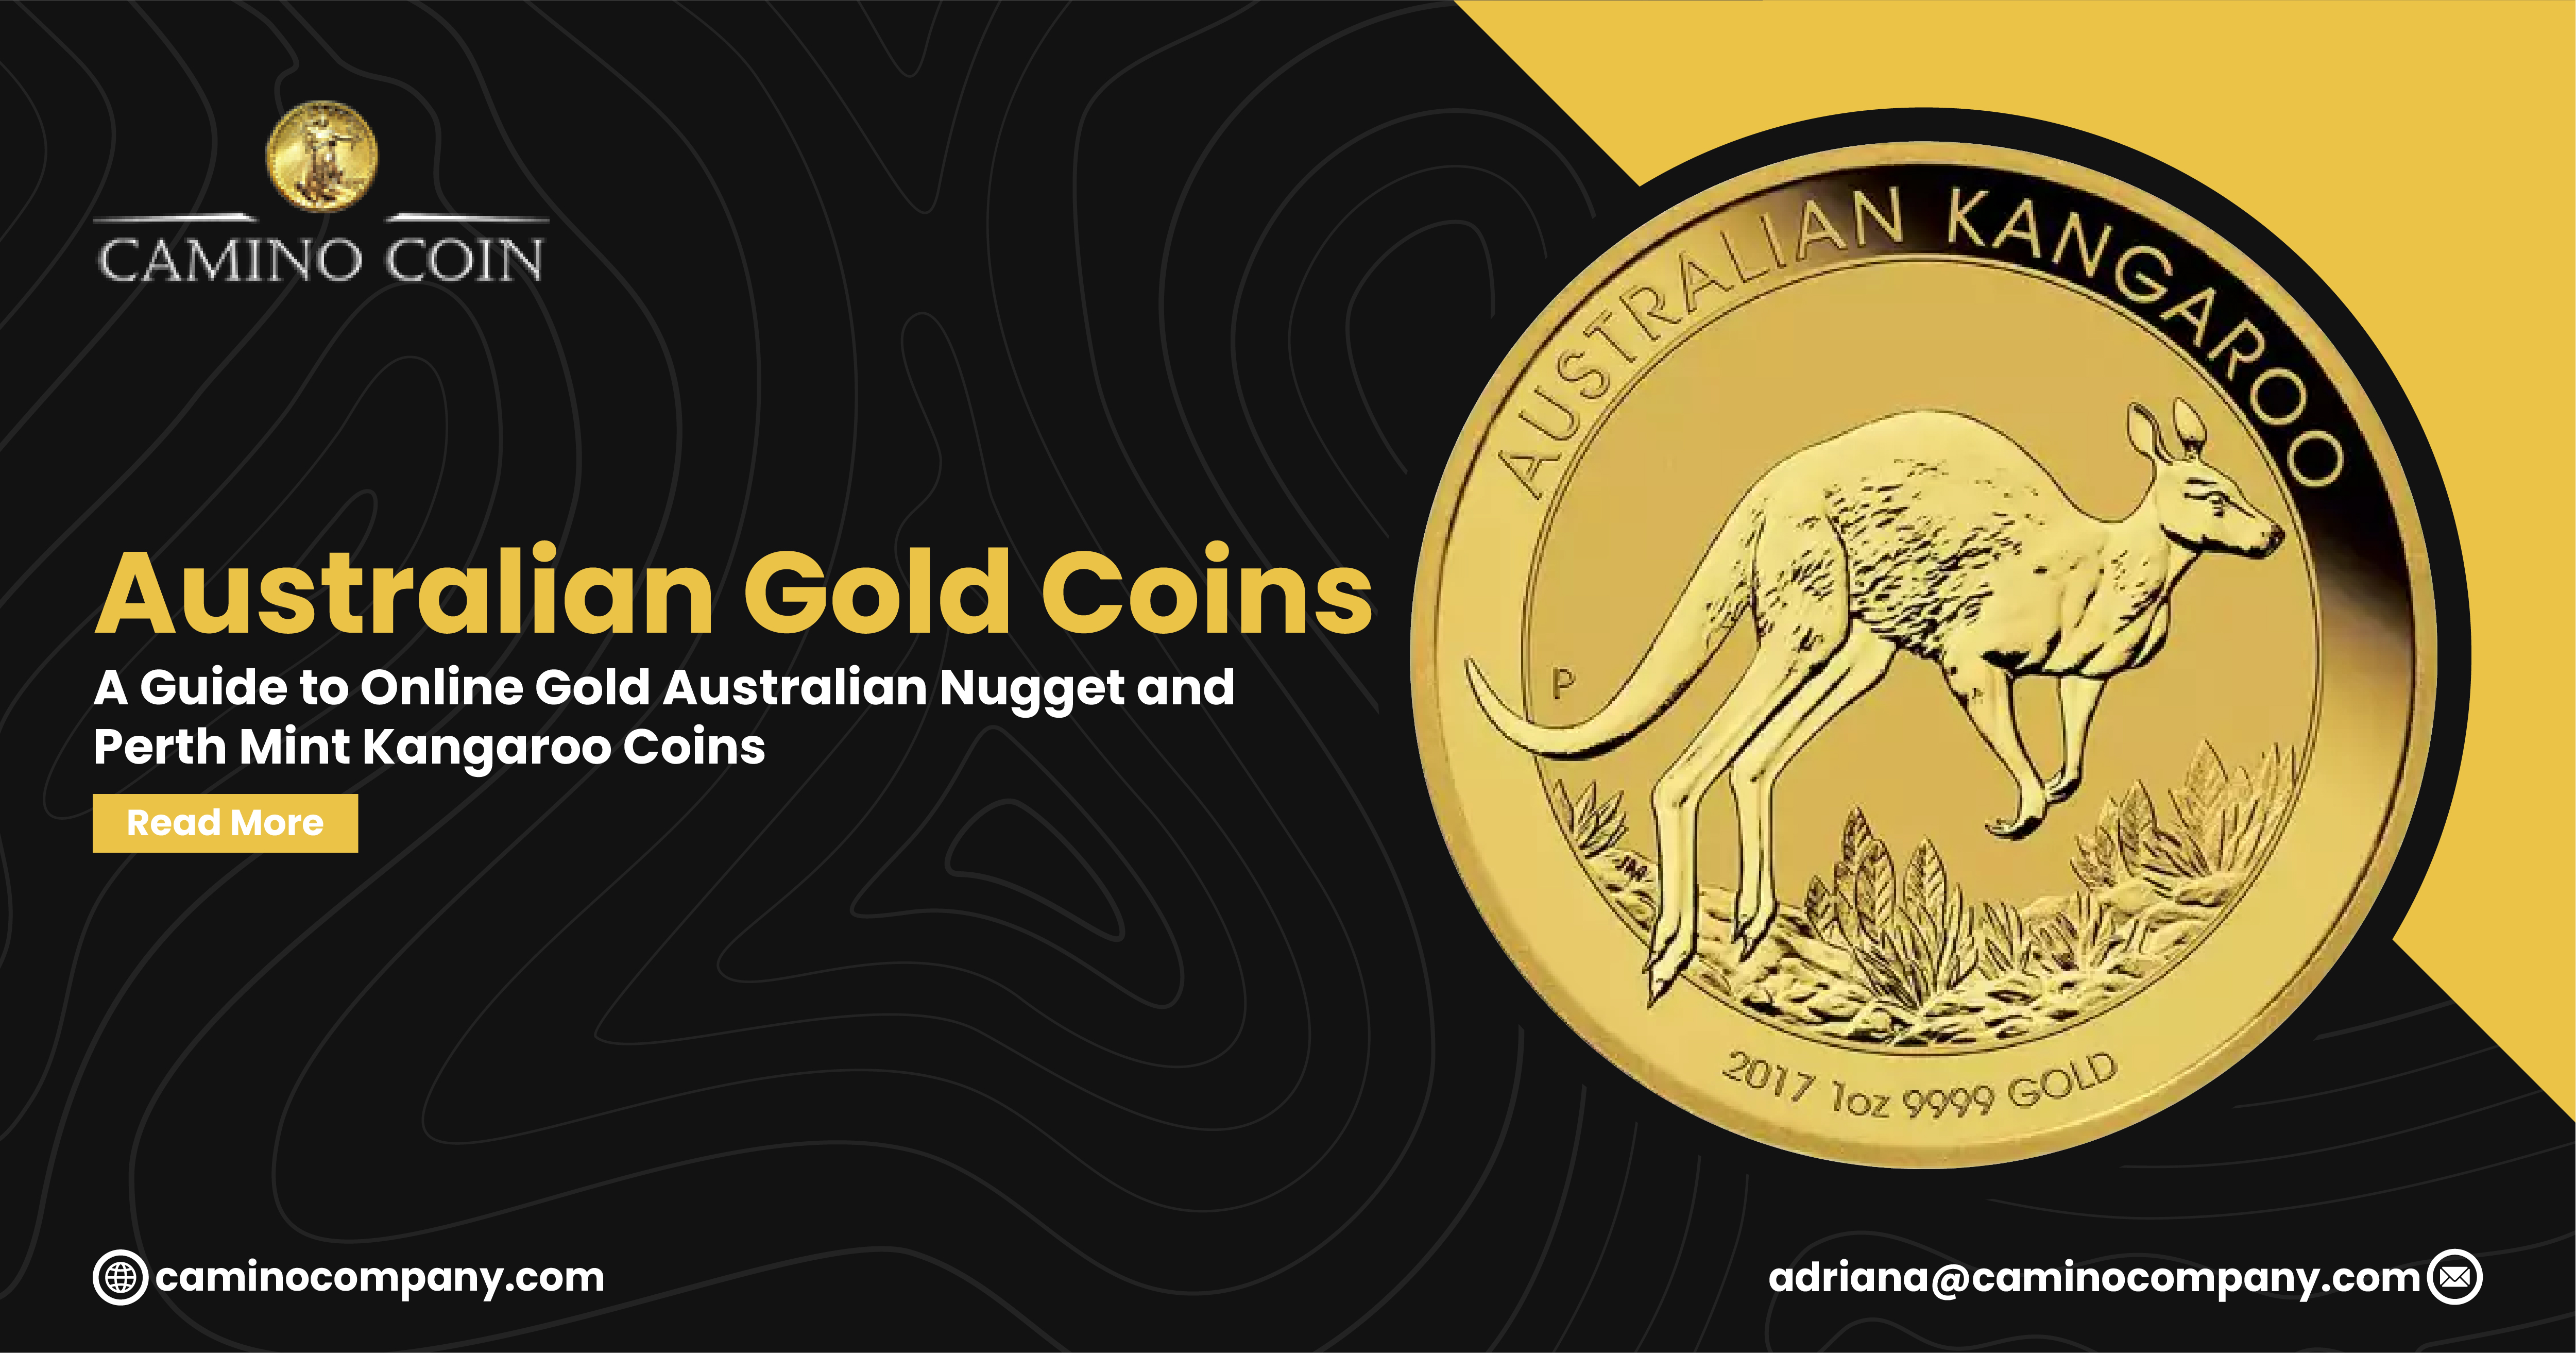 Australian Gold Coins: A Guide to Online Gold Australian Nugget and Perth Mint Kangaroo Coins